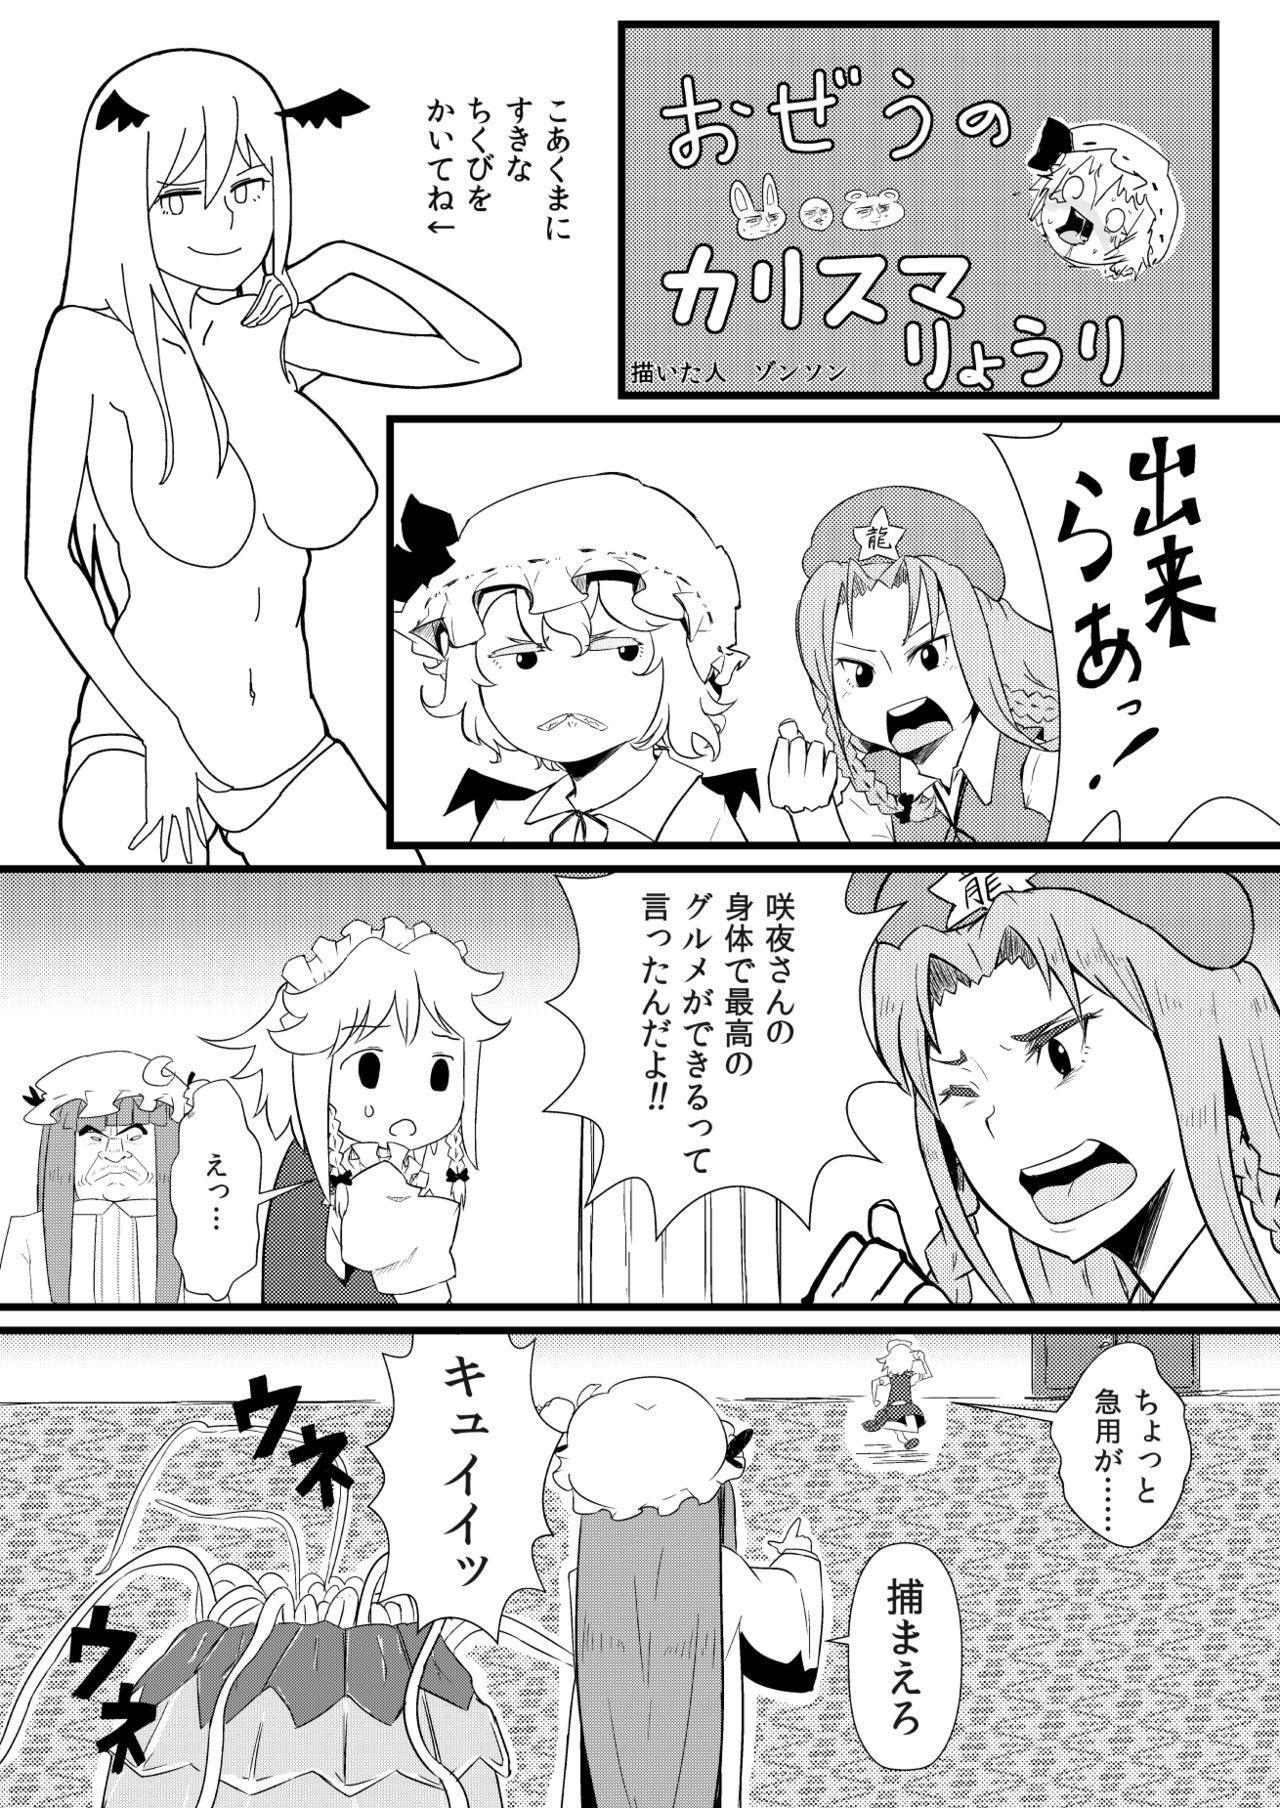 Threeway 東方板としあき合同誌5 - Touhou project Flogging - Page 5